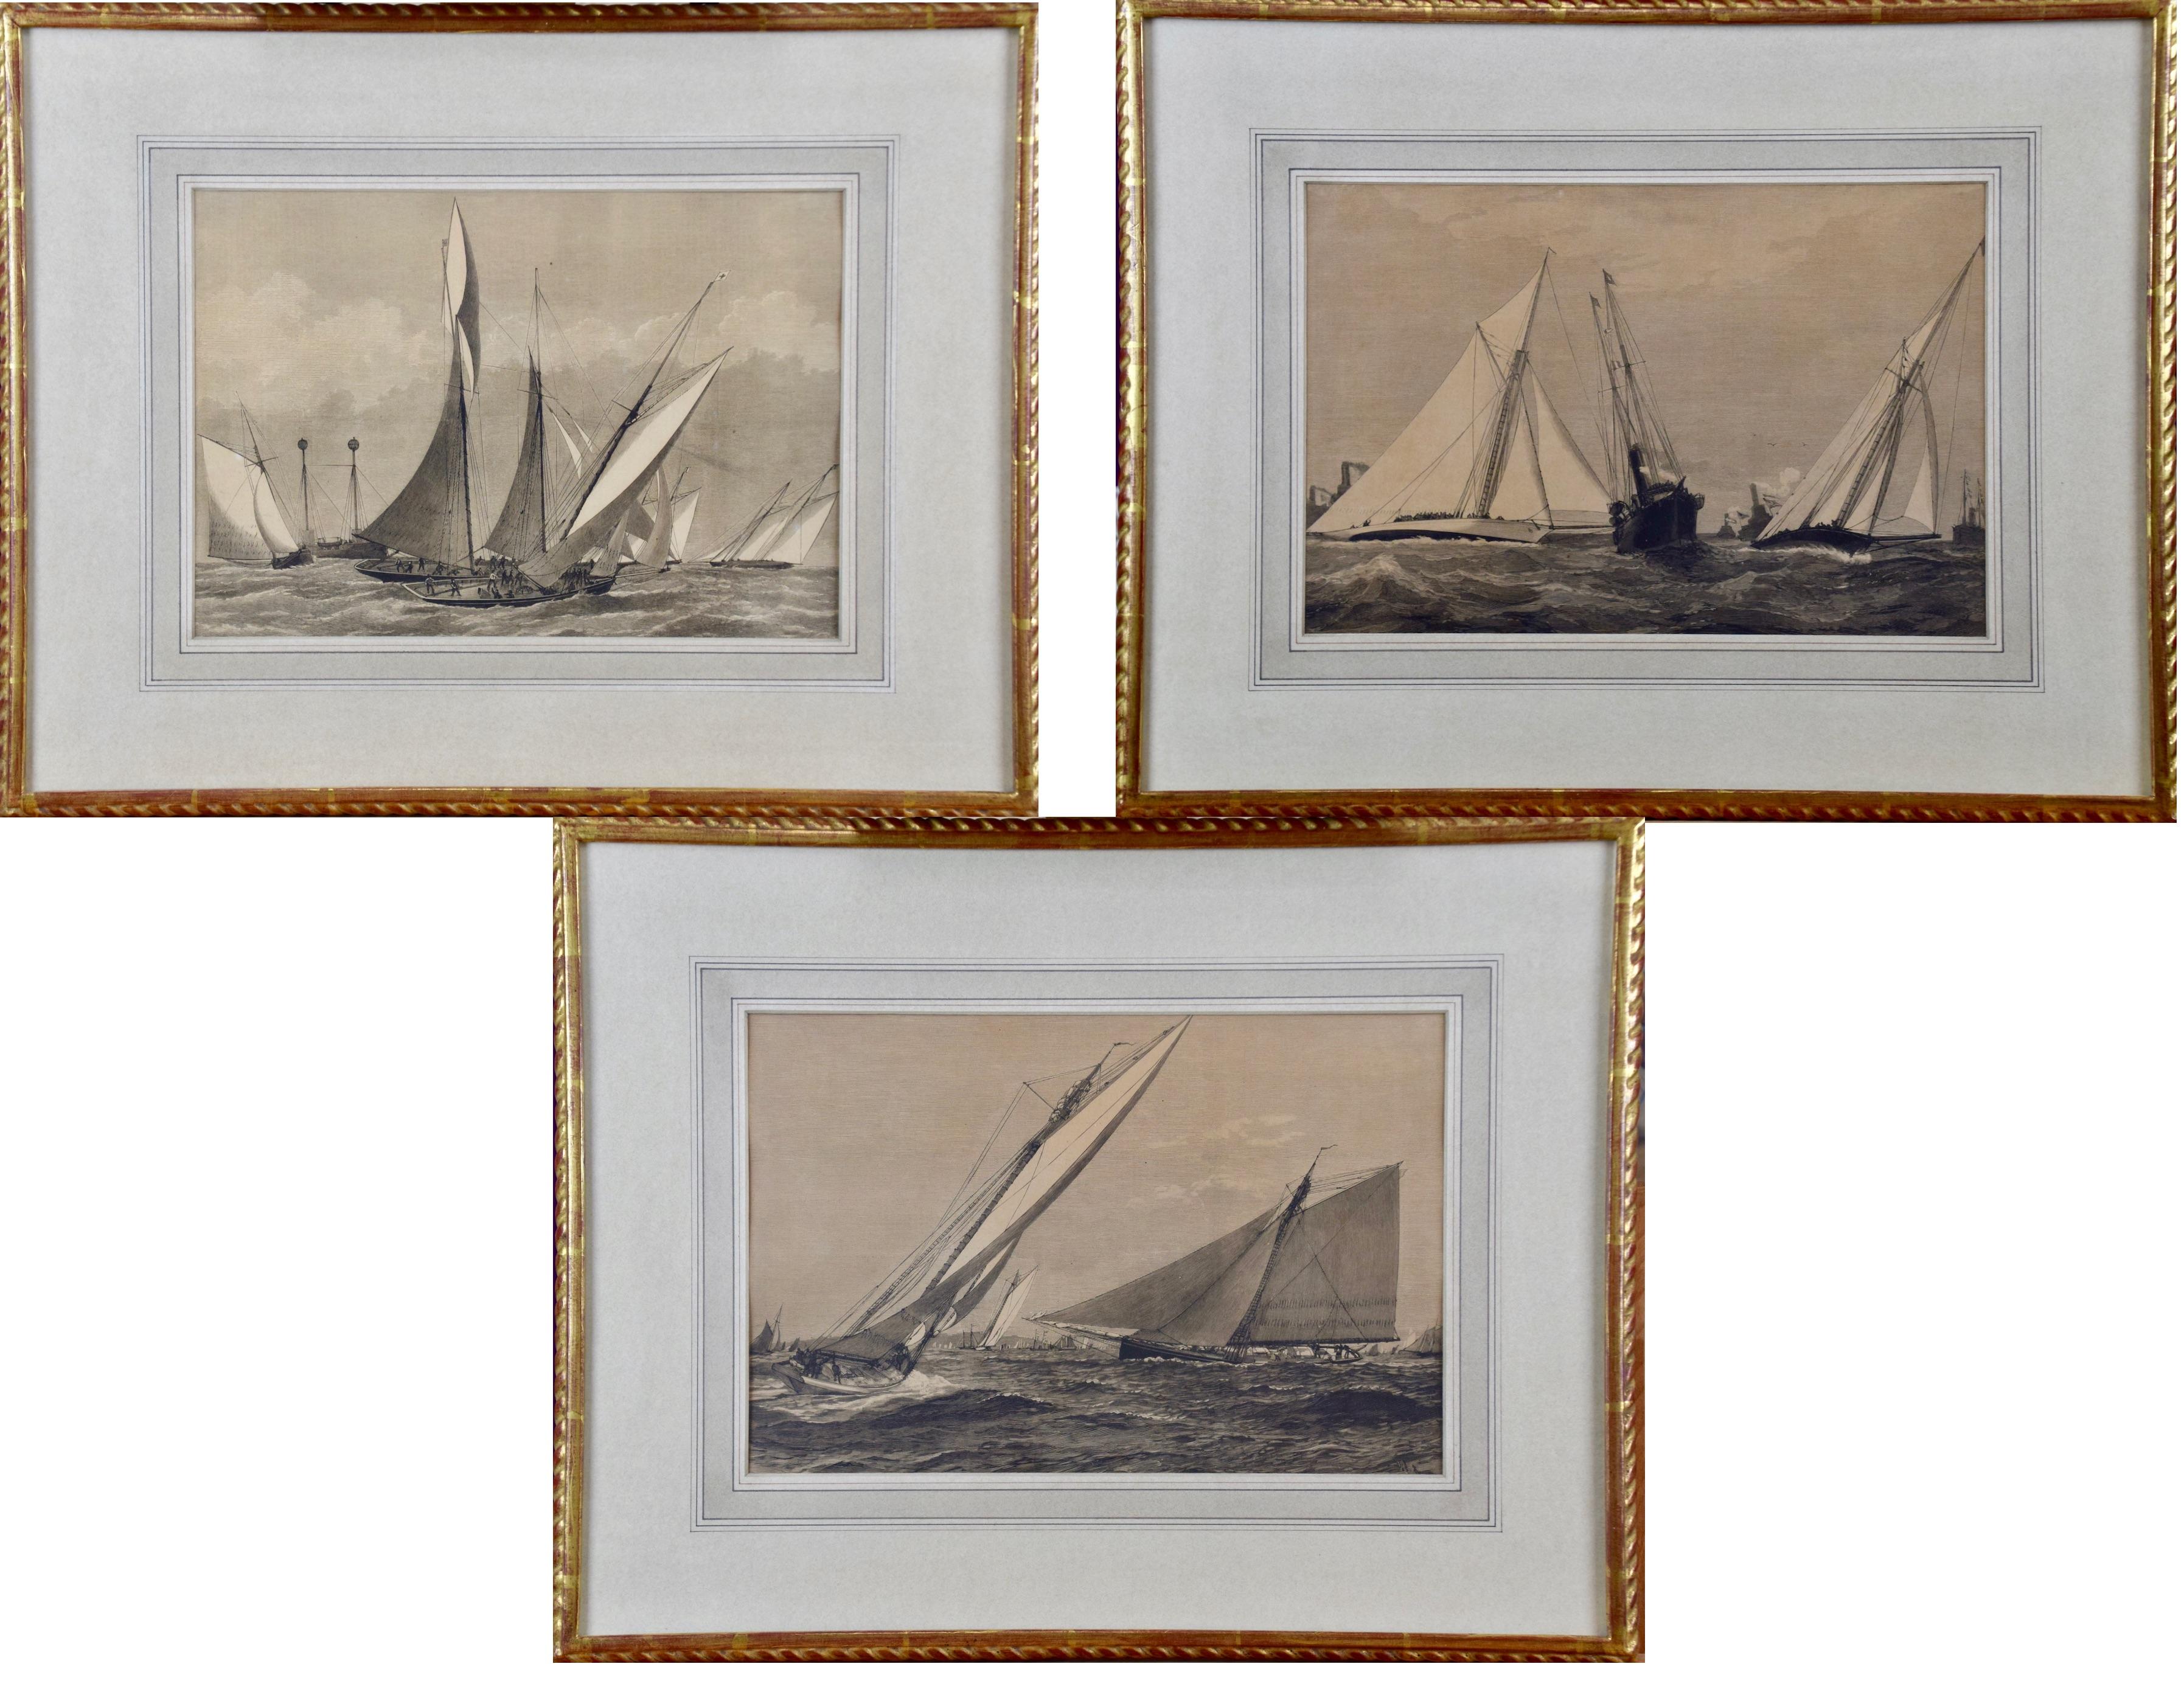 Three Engravings Depicting Sailing Yachts Competing in 1885 America's Cup Trials